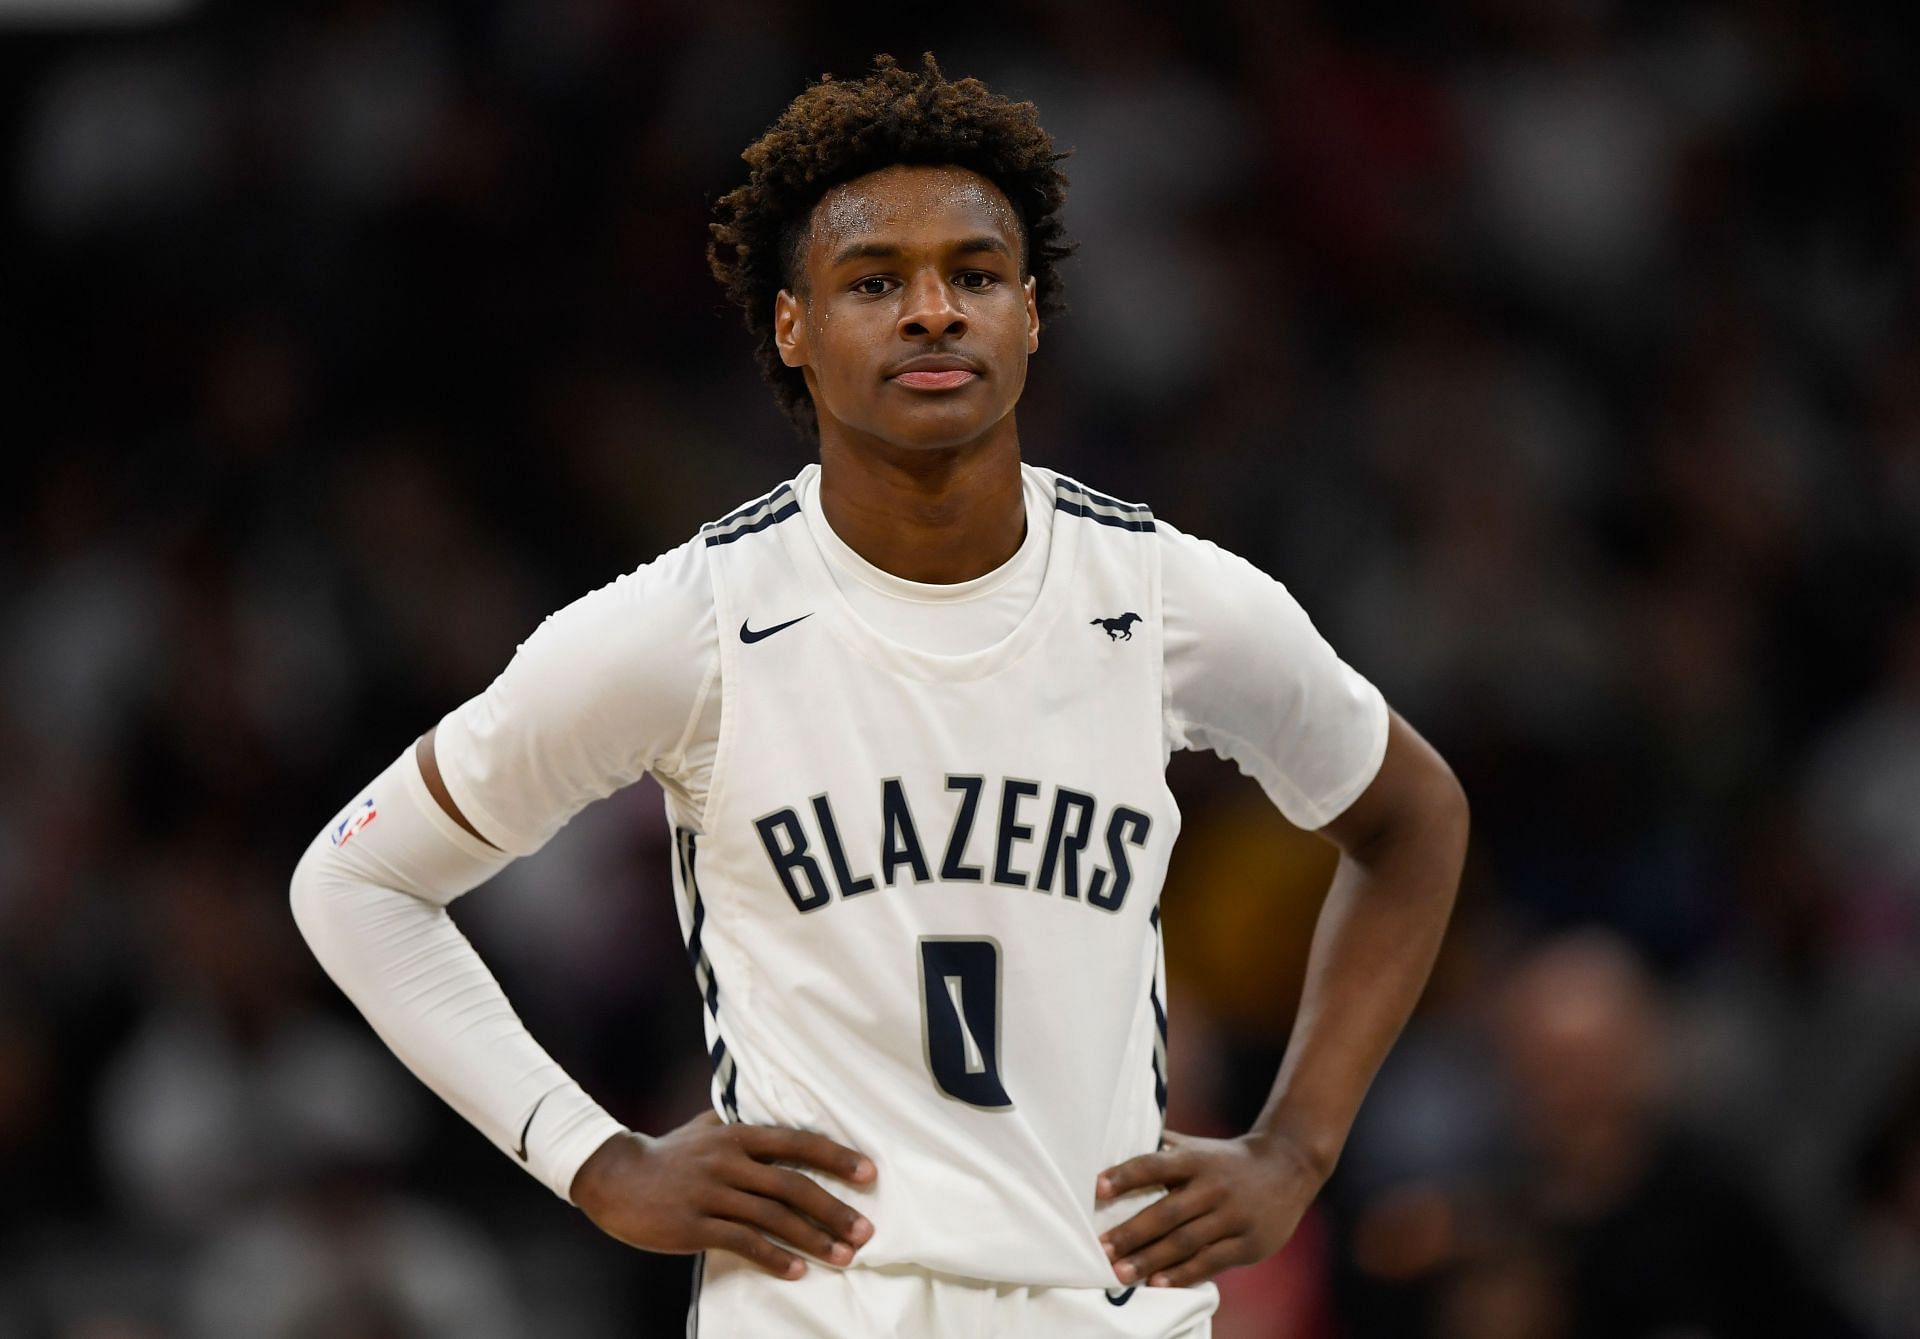 Sierra Canyon guard Bronny James continues to buzz